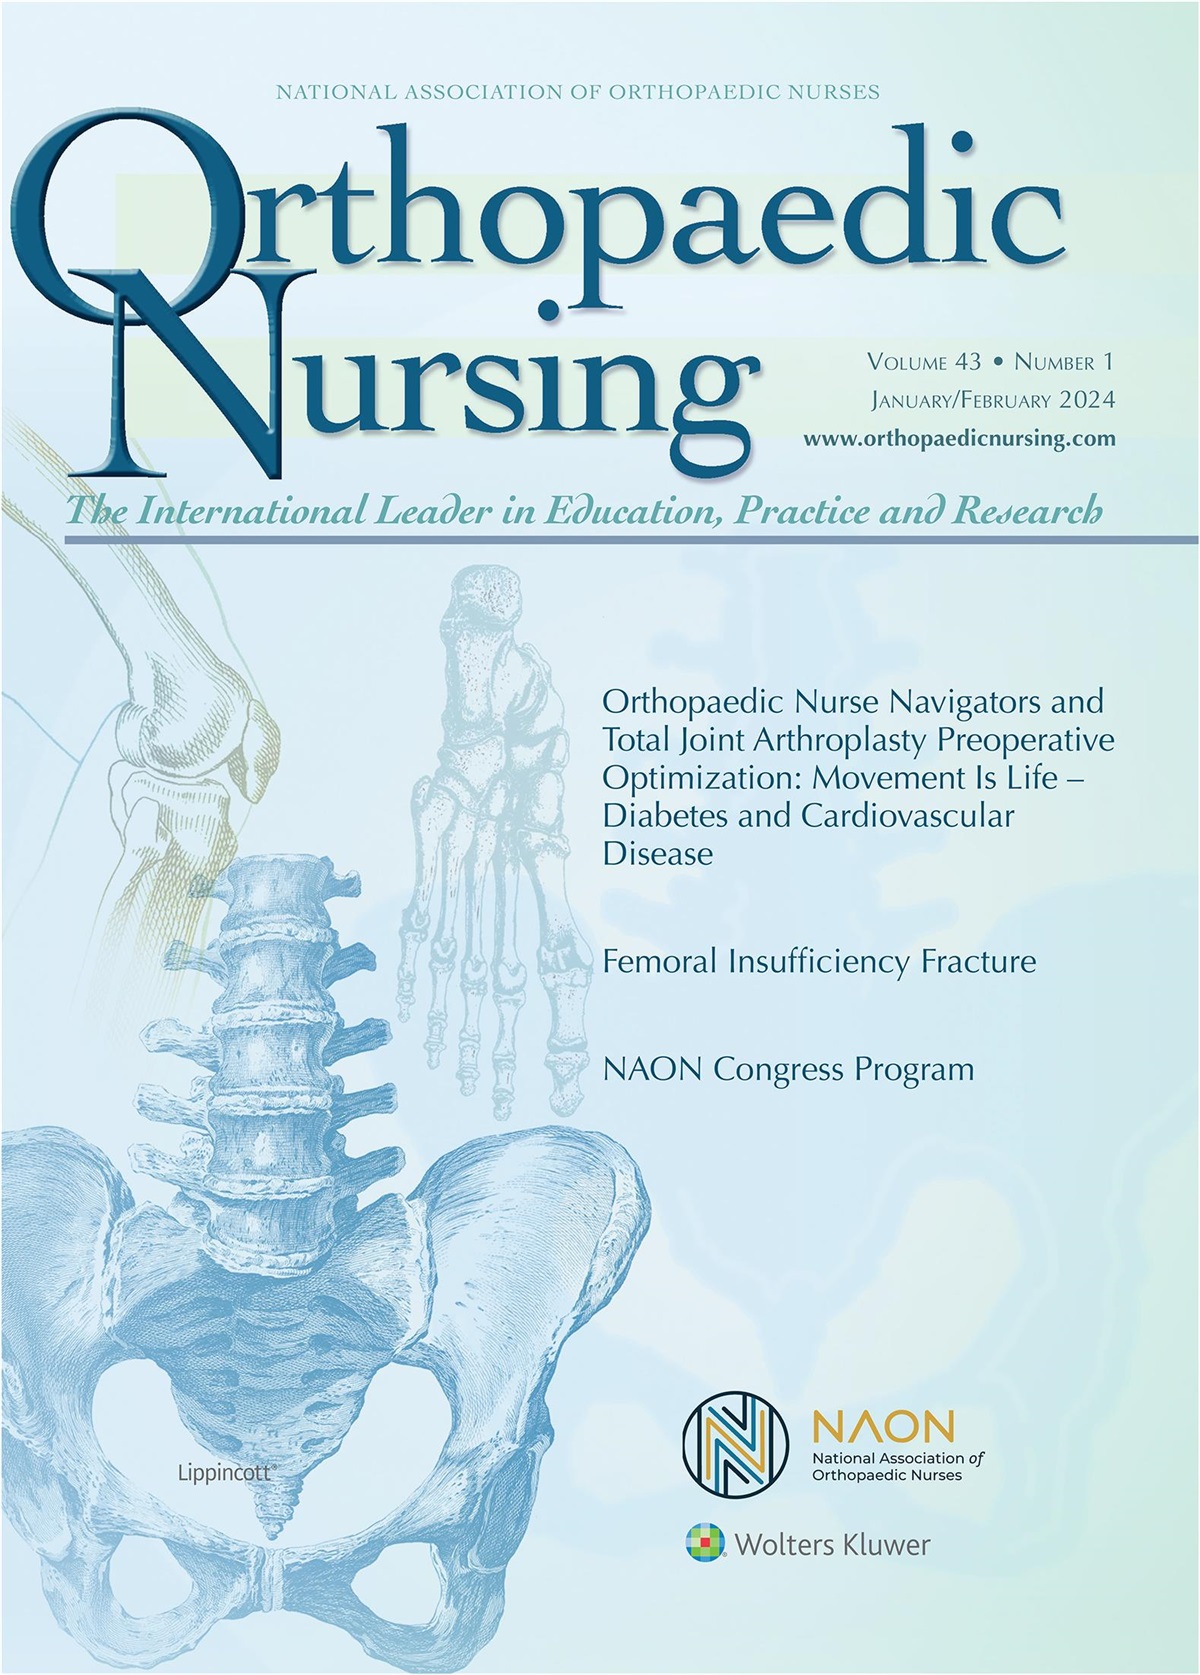 Orthopaedic Nurse Navigators and Total Joint Arthroplasty Preoperative Optimization: Improving Patient Access to Musculoskeletal Care: Erratum